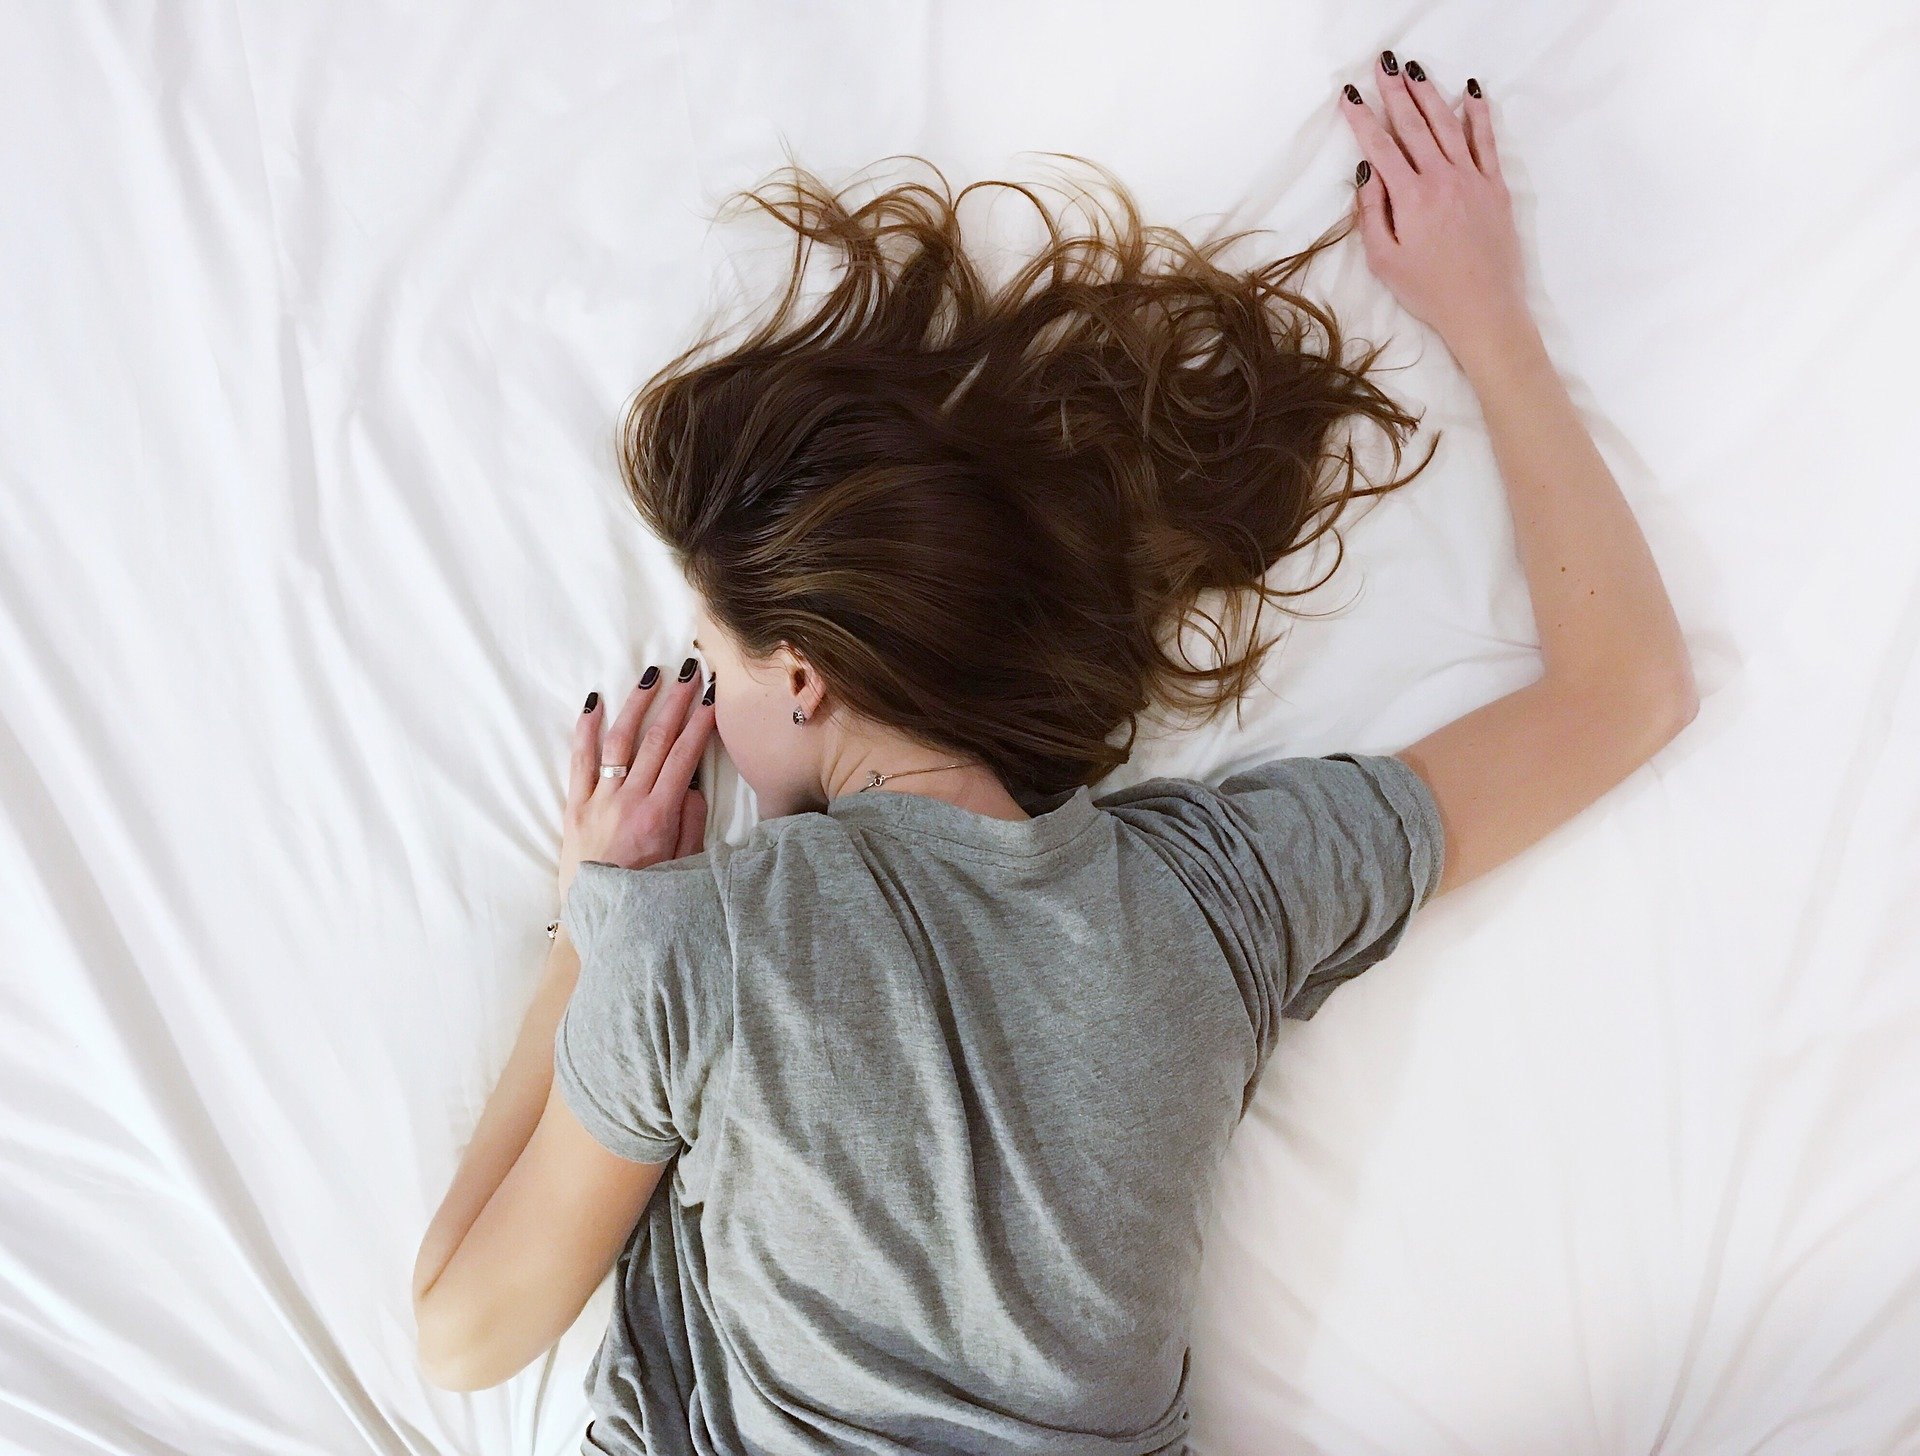 Woman face down on a bed